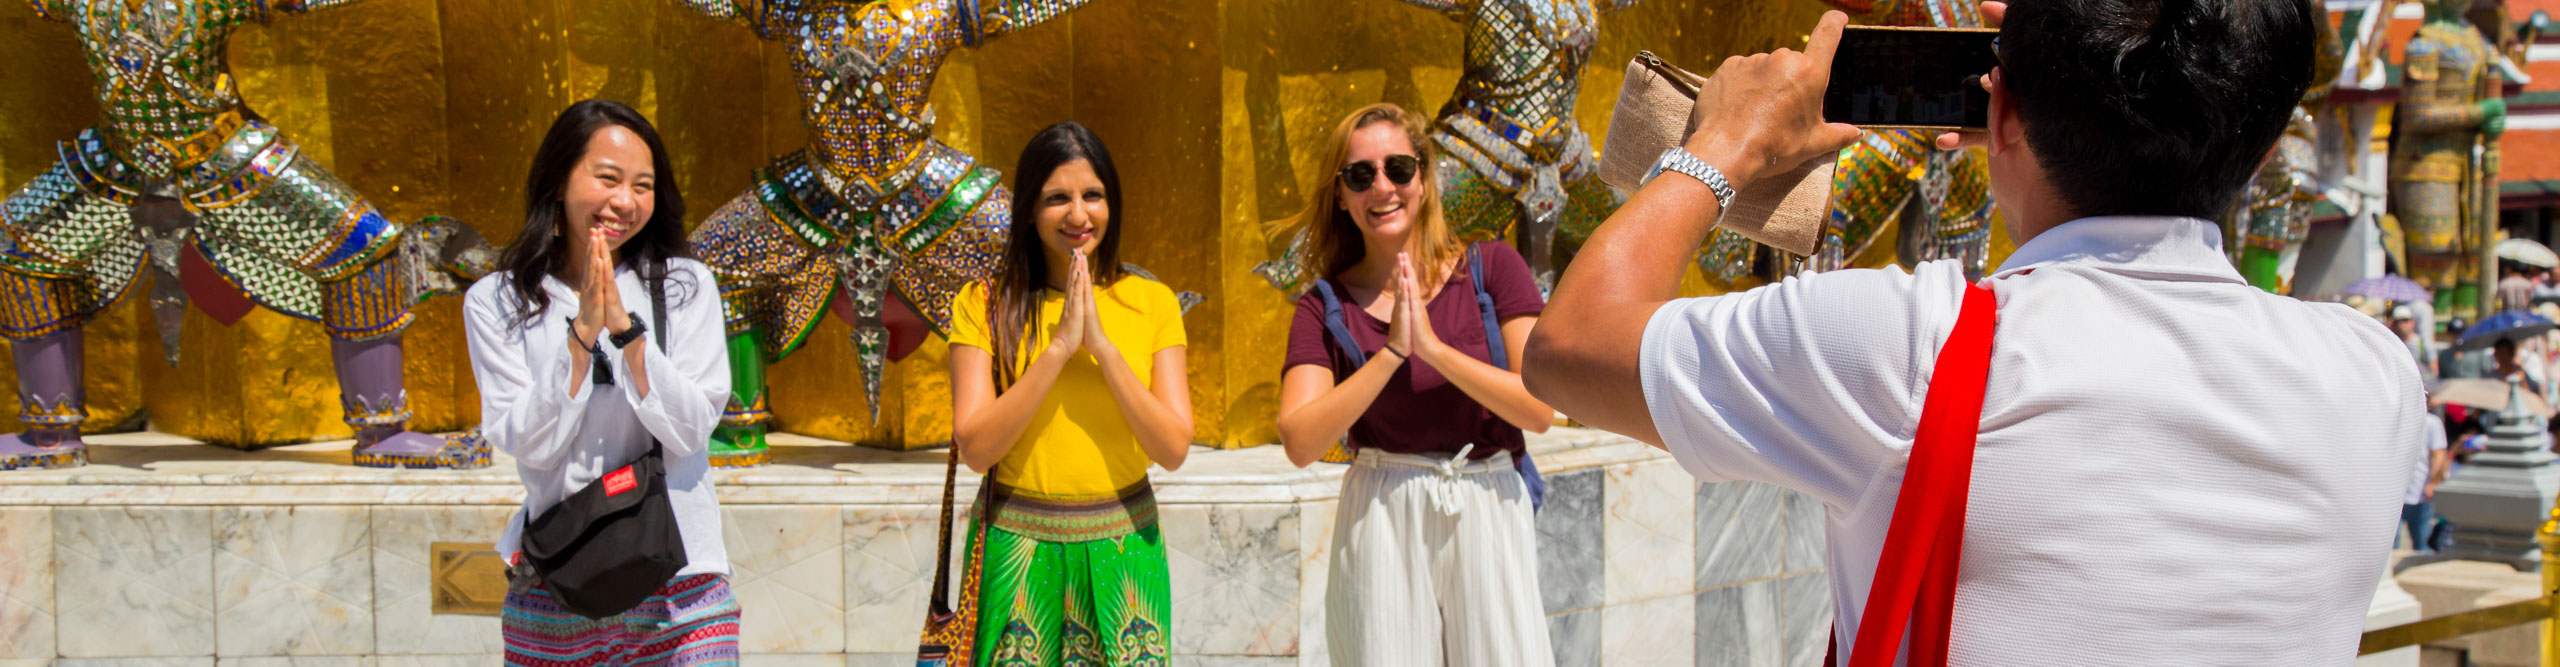 Tourists having their picture taken in front of a temple in Bangkok, Thailand, on a sunny day